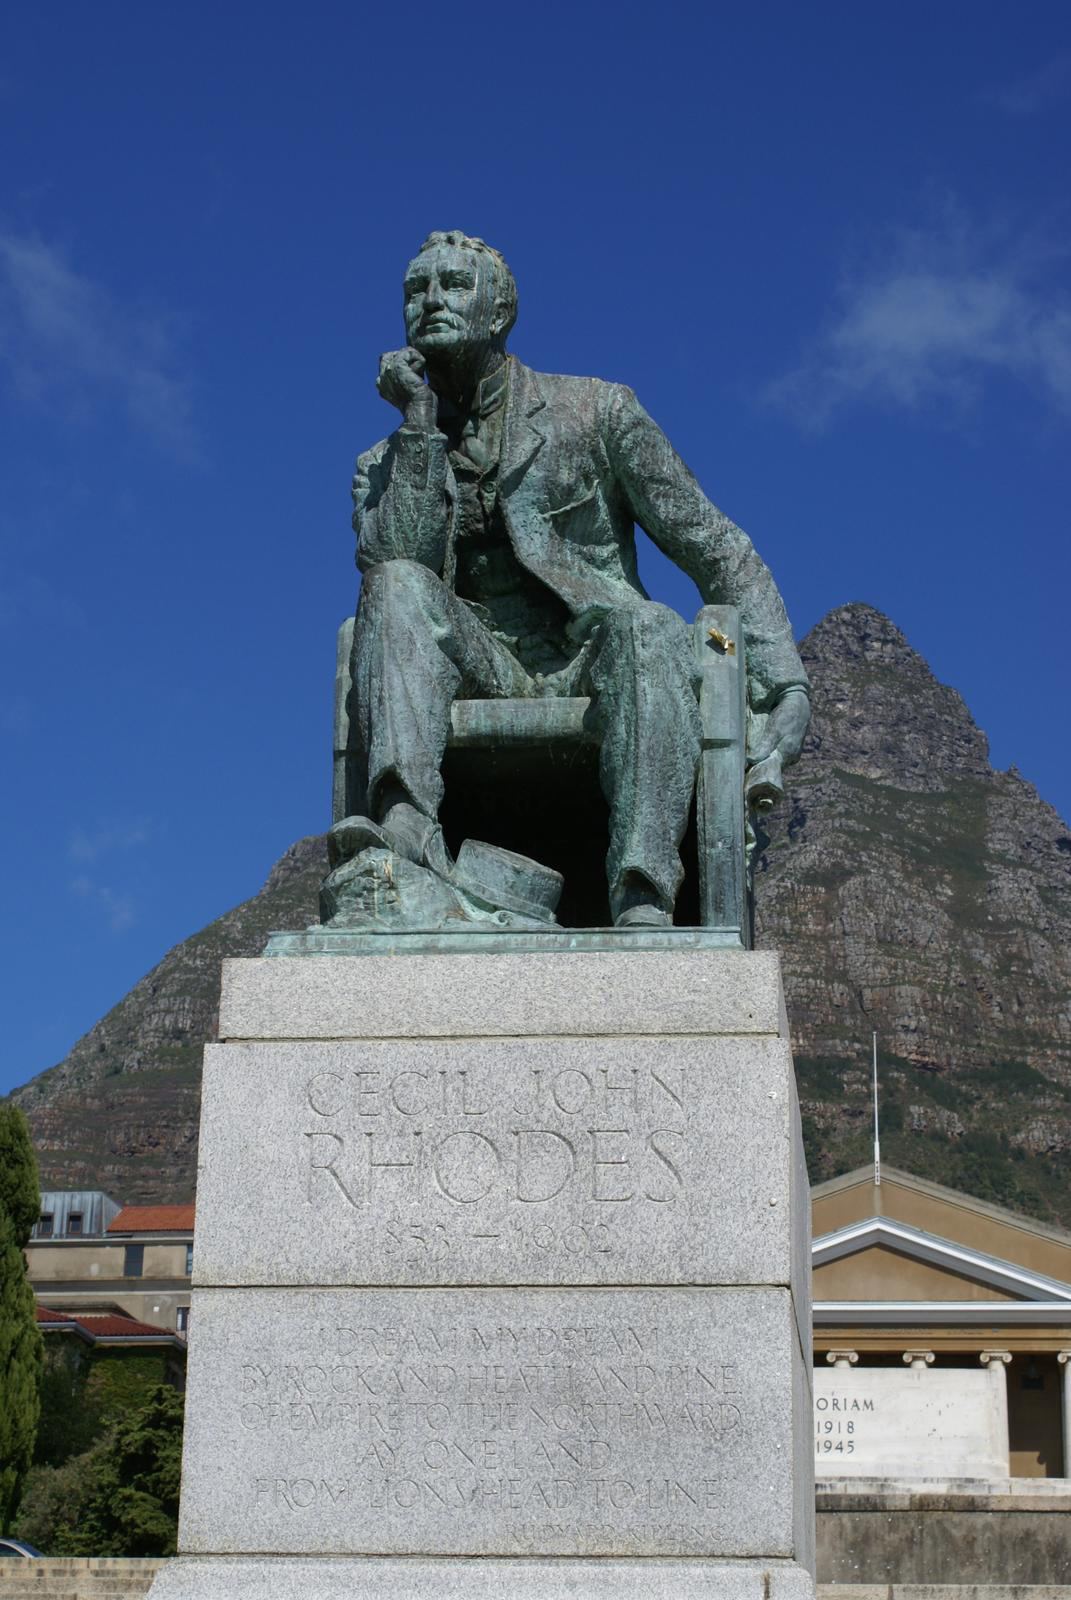 This statue of Cecil Rhodes was removed from the campus of the University of Cape Town in March 2015, after protests by the #RhodesMustFall movement. Danie van der Merwe/Via Wikimedia Commons 